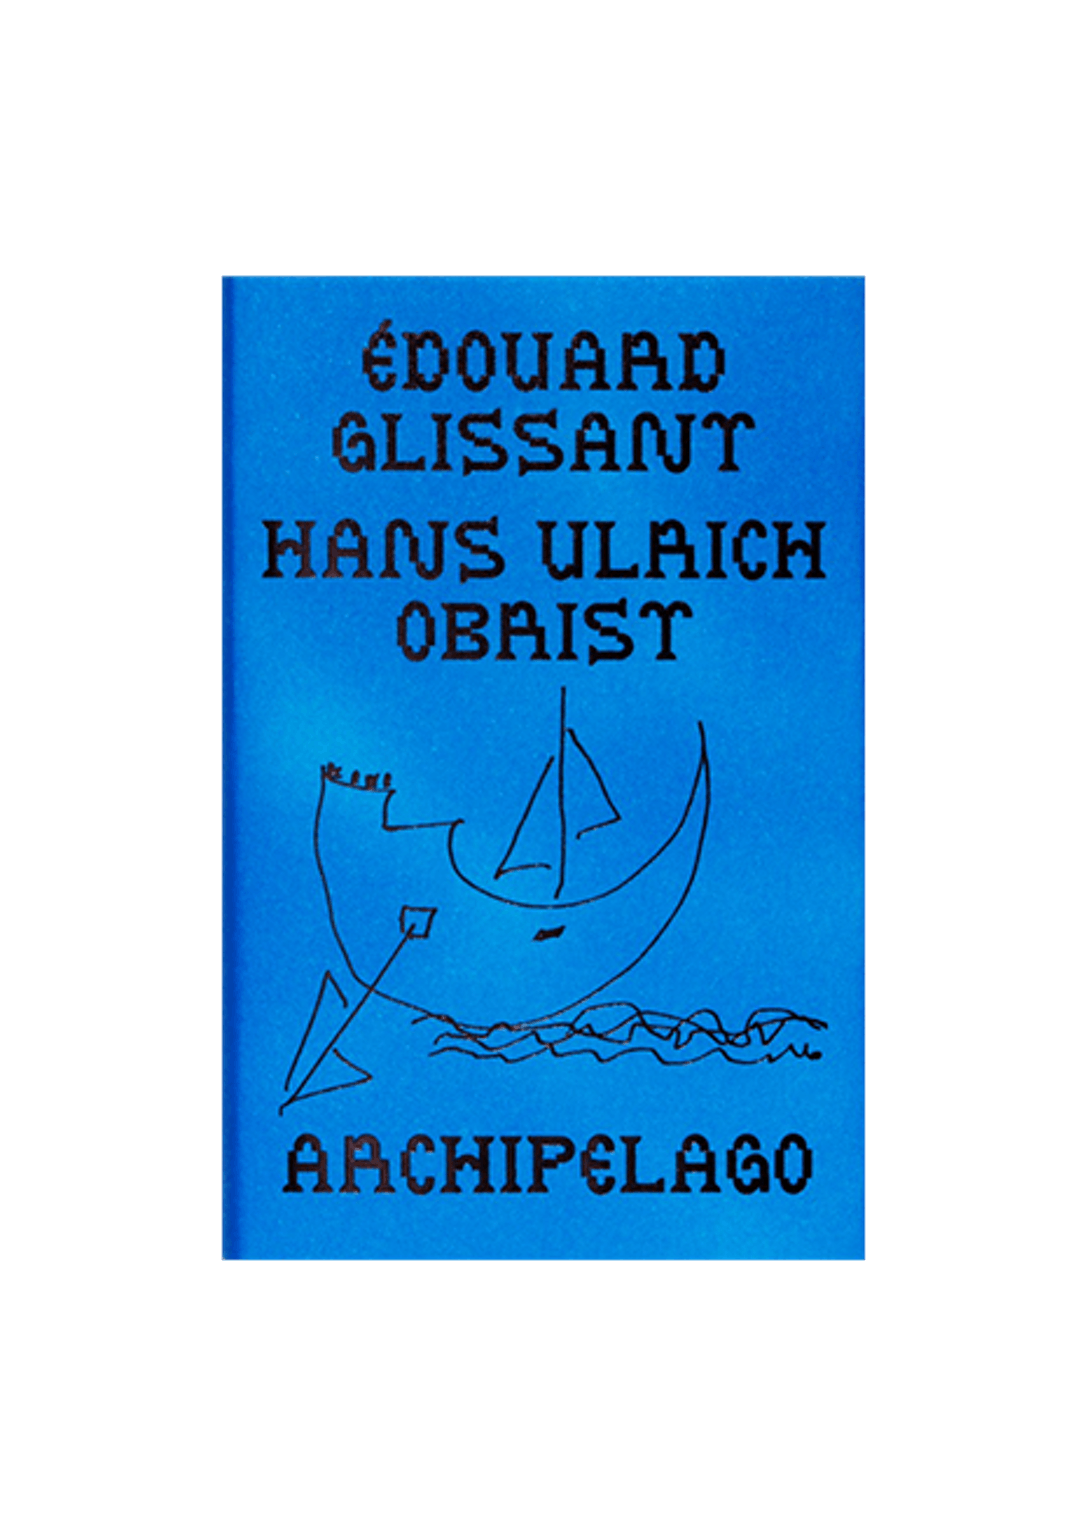 Isolarii - 'The Archipelago Conversations' by Glissant and Obrist